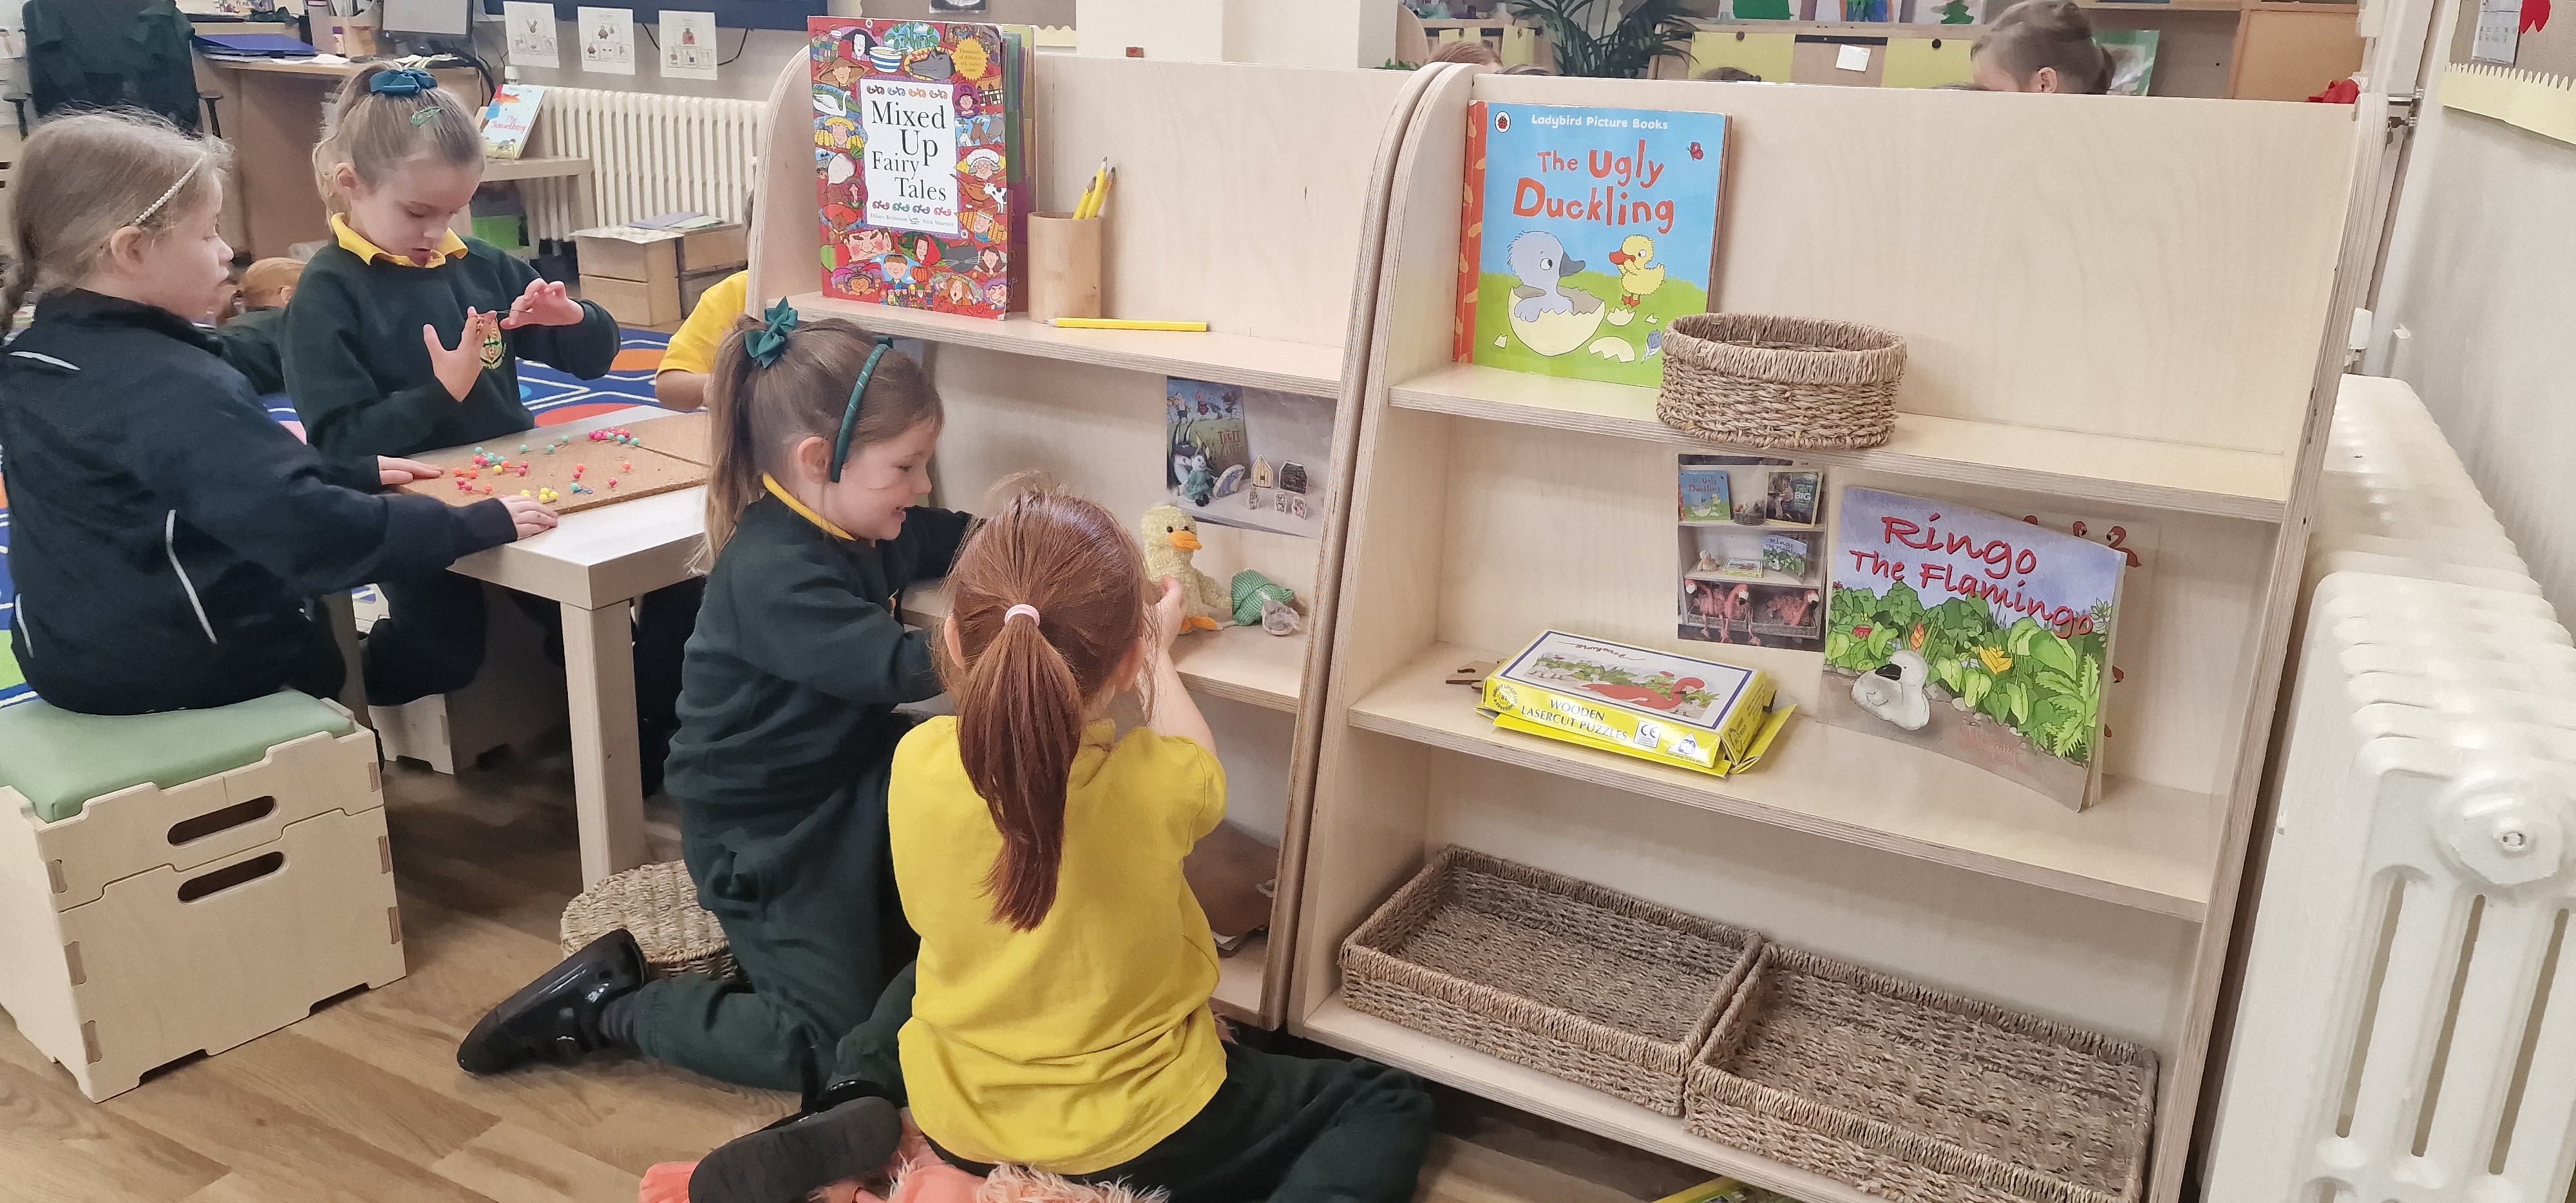 2 children are looking through the angled storage on wheels, created by Pentagon Play. In this indoor classroom, the storage unit is displaying books, teddies and pencils.